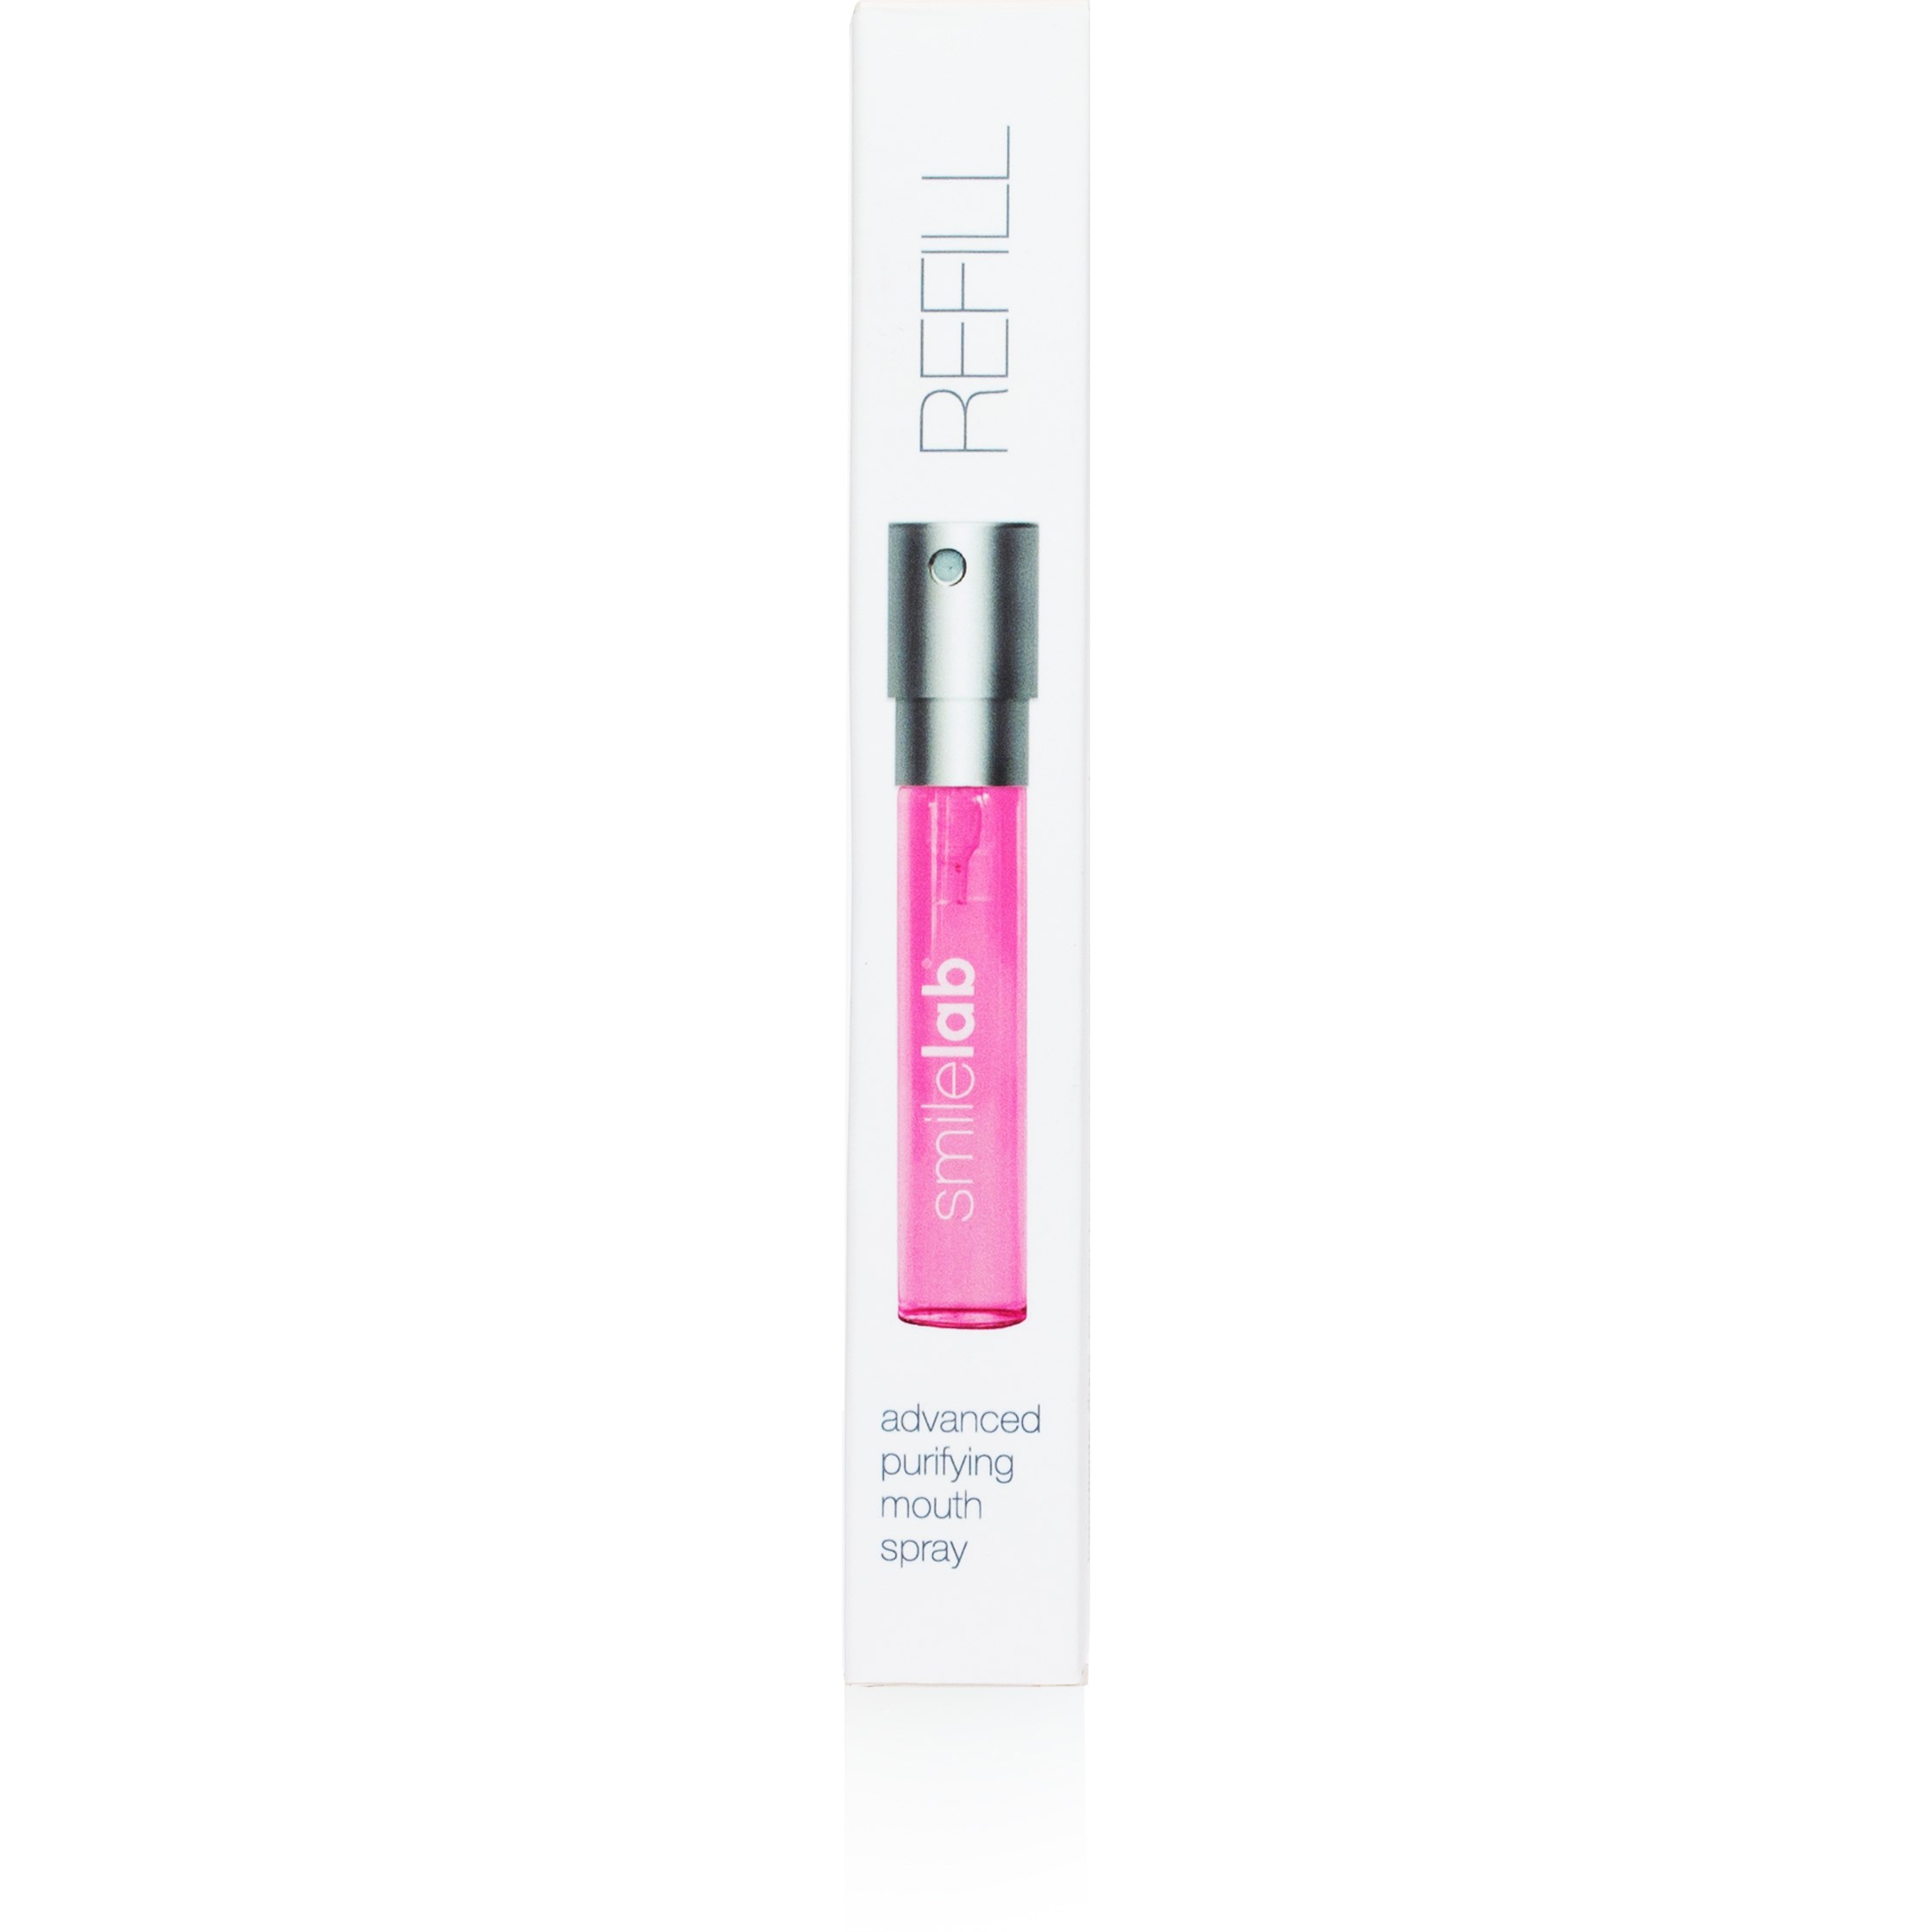 Smile Lab SIGNATURE Purifying mouth spray REFILL 8 ml